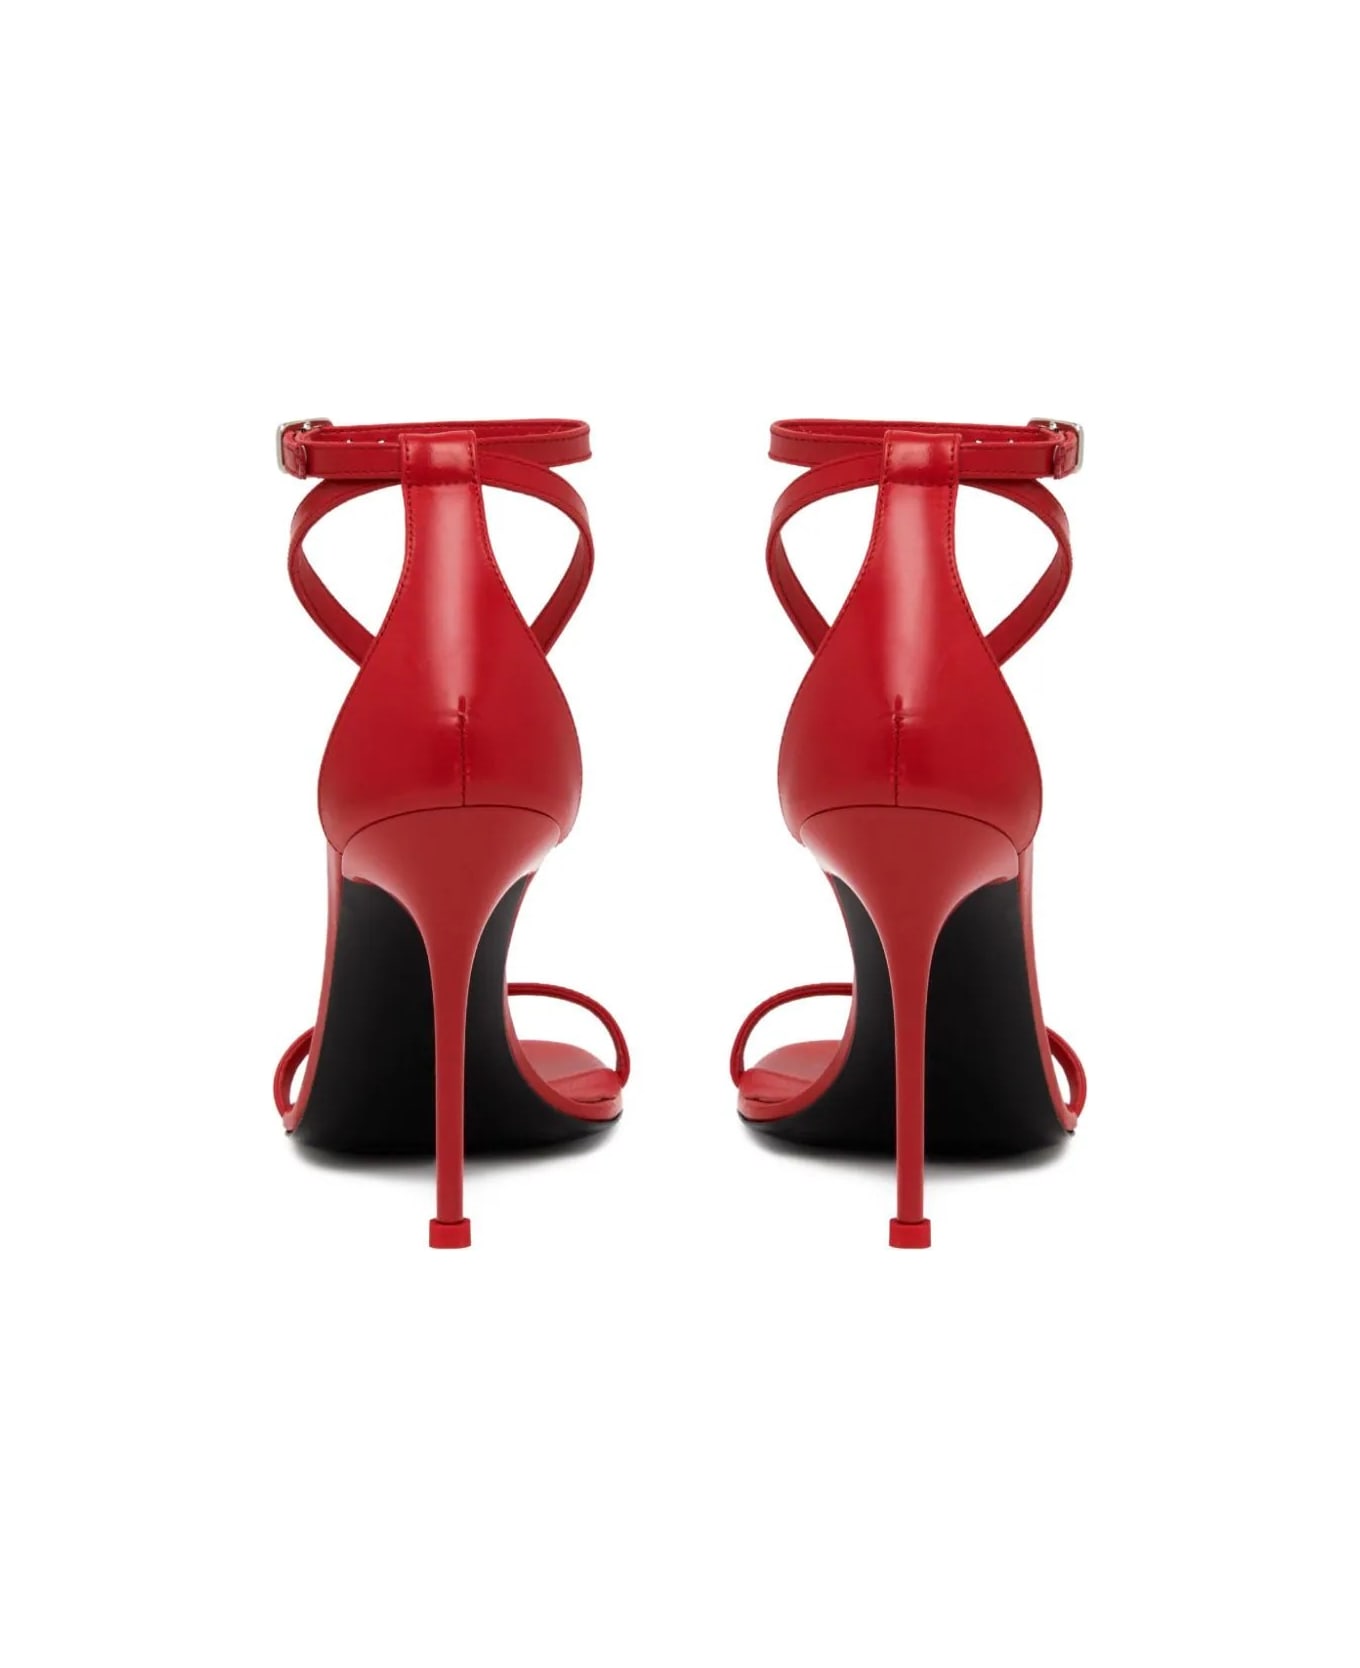 Alexander McQueen Harness Sandals In Lust Red - Red